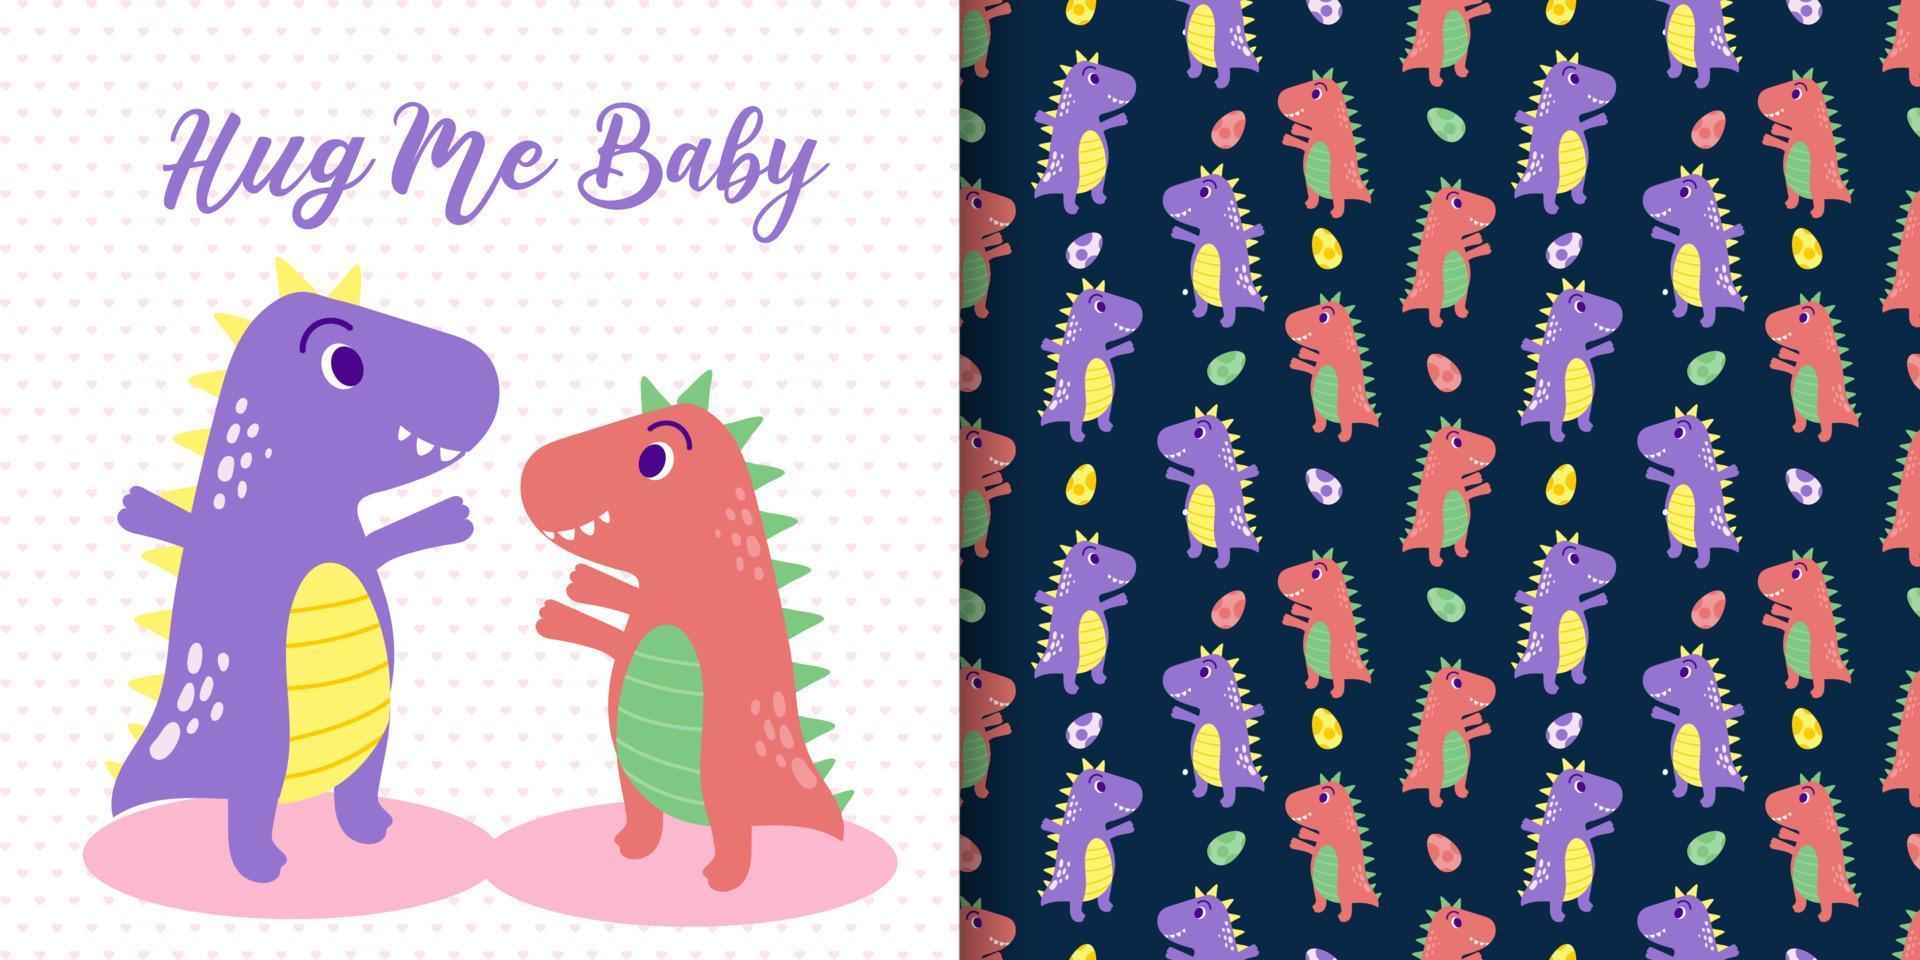 cute animal dinosaurs cartoon illustration character with seamless pattern vector